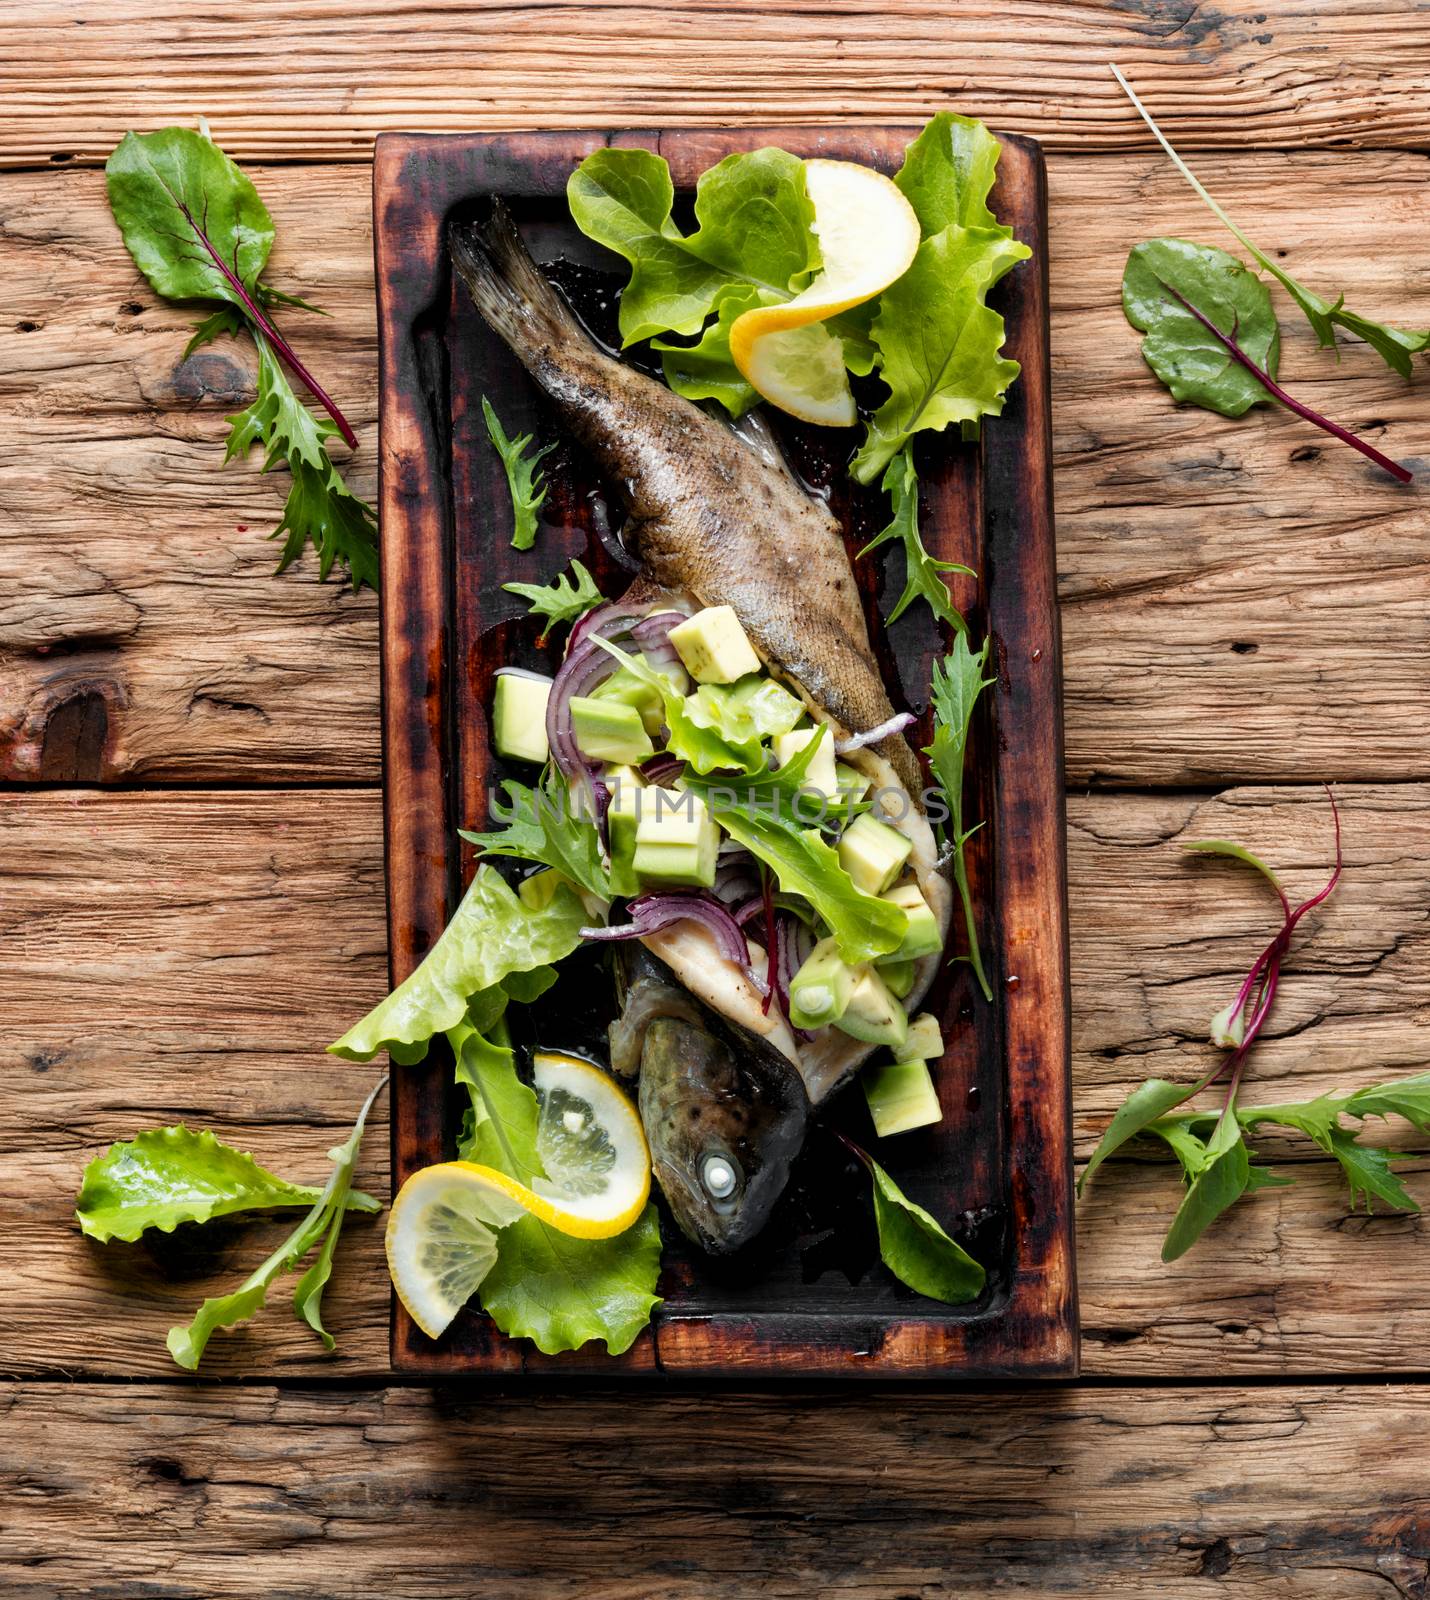 Baked trout with avocado on a wooden kitchen board.Baked fish with lettuce and avacado